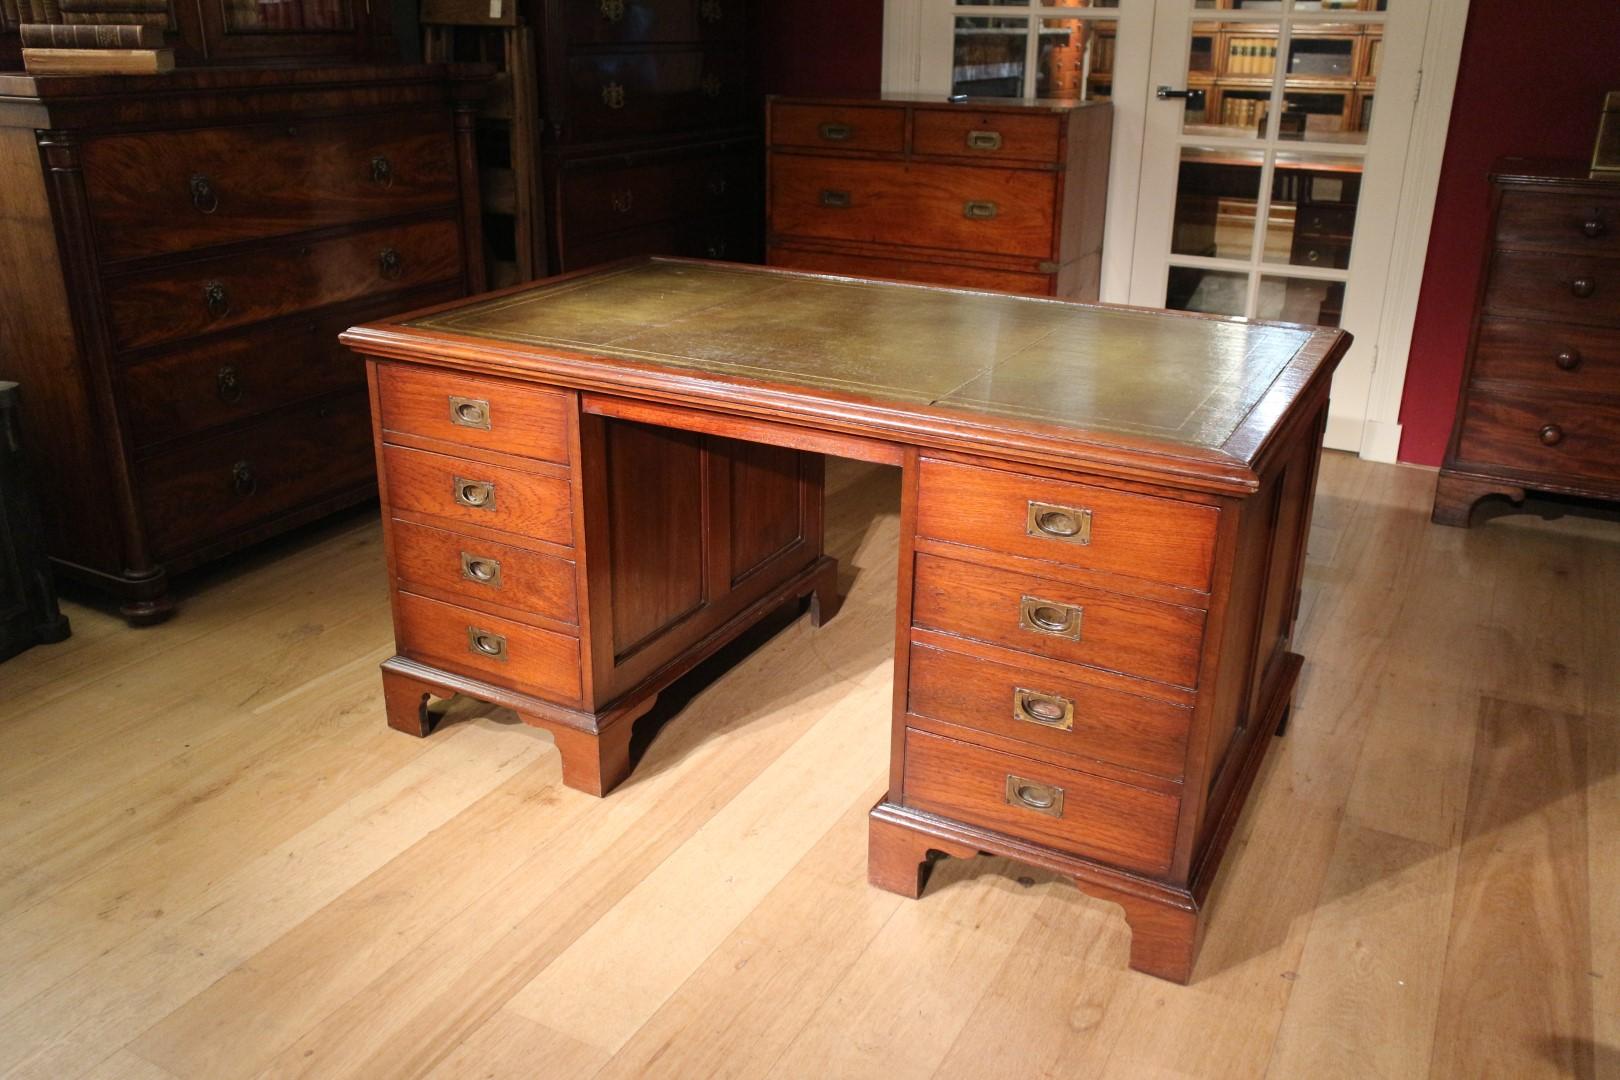 Beautiful antique teak partners desk that can be used from 2 sides. Entirely in very good condition. Green gold-edged leather top. The desk has no drawer in the middle and therefore plenty of legroom. One side has 8 drawers with the characteristic